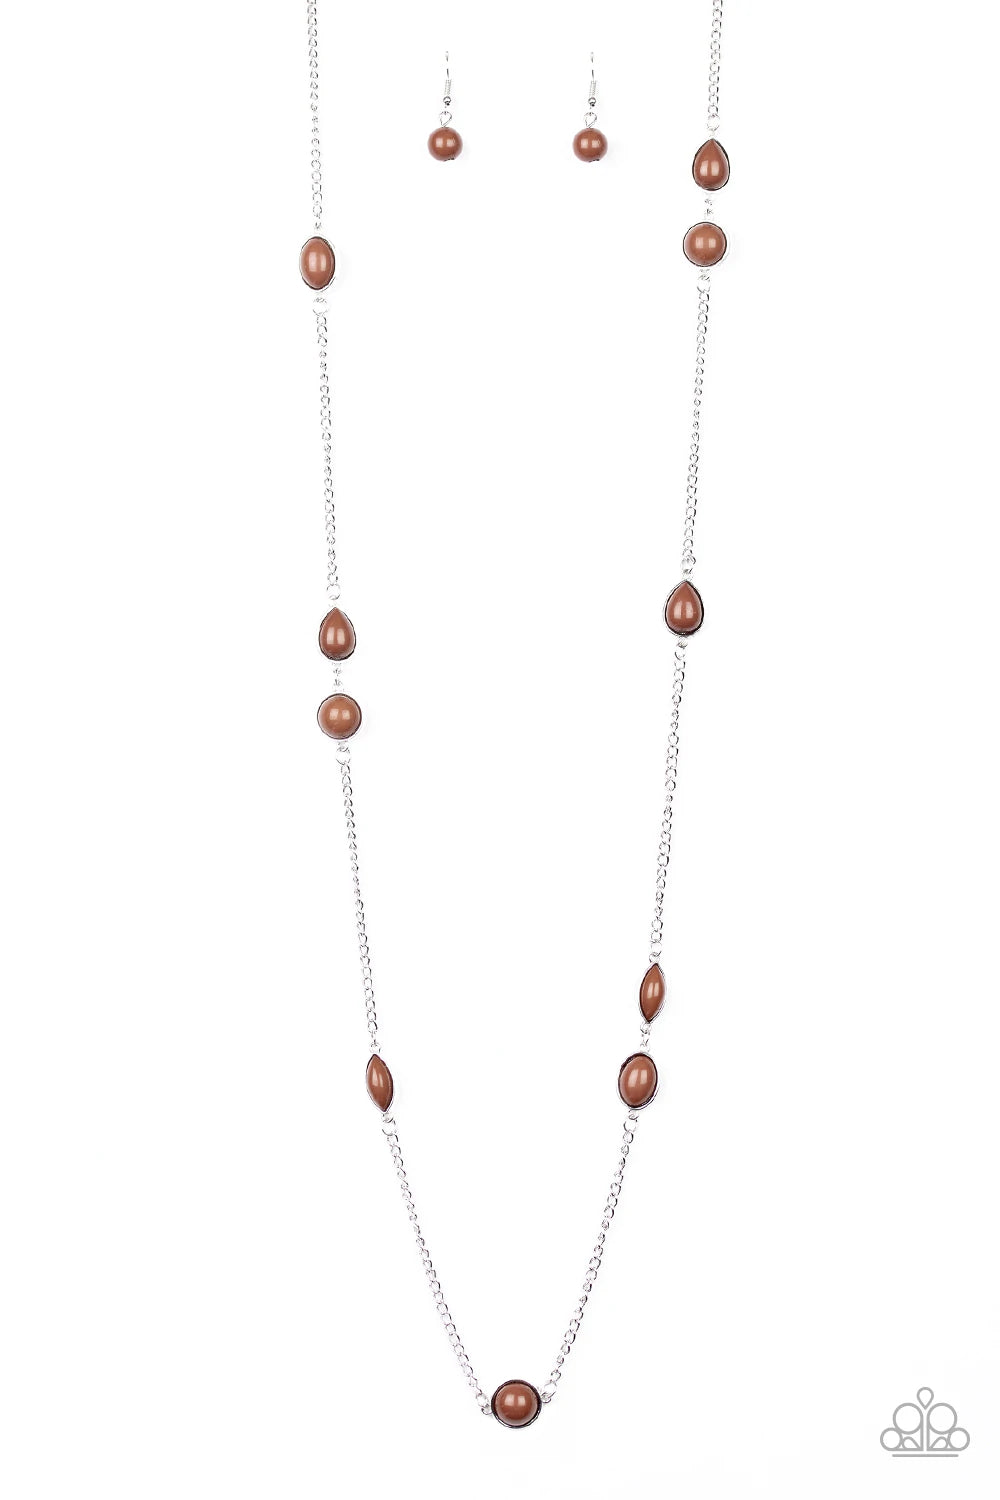 Pacific Piers - Brown Necklace